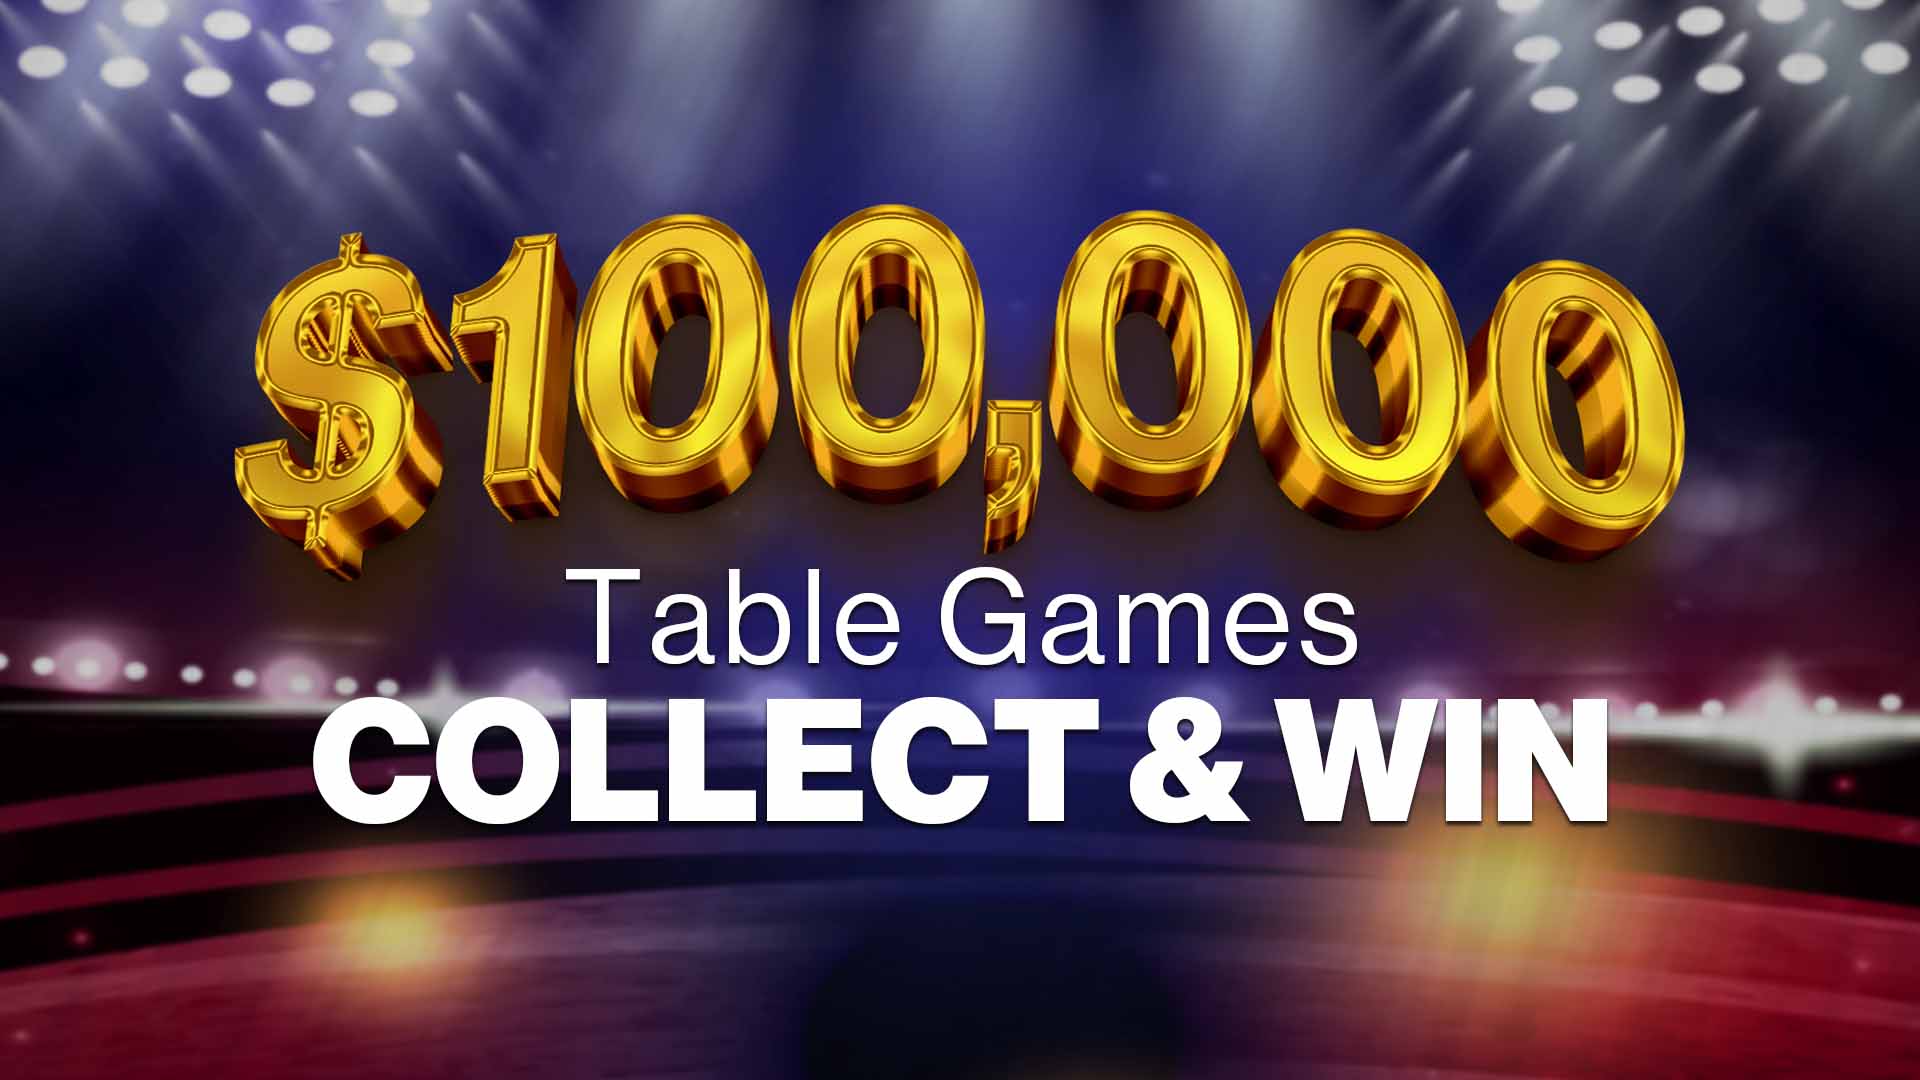 https://www.grandsierraresort.com/hubfs/special-events/20230907_100000-dollar-Table-Games-Collect-and-Win_hero_v01_1920x1080.jpg#keepProtocol